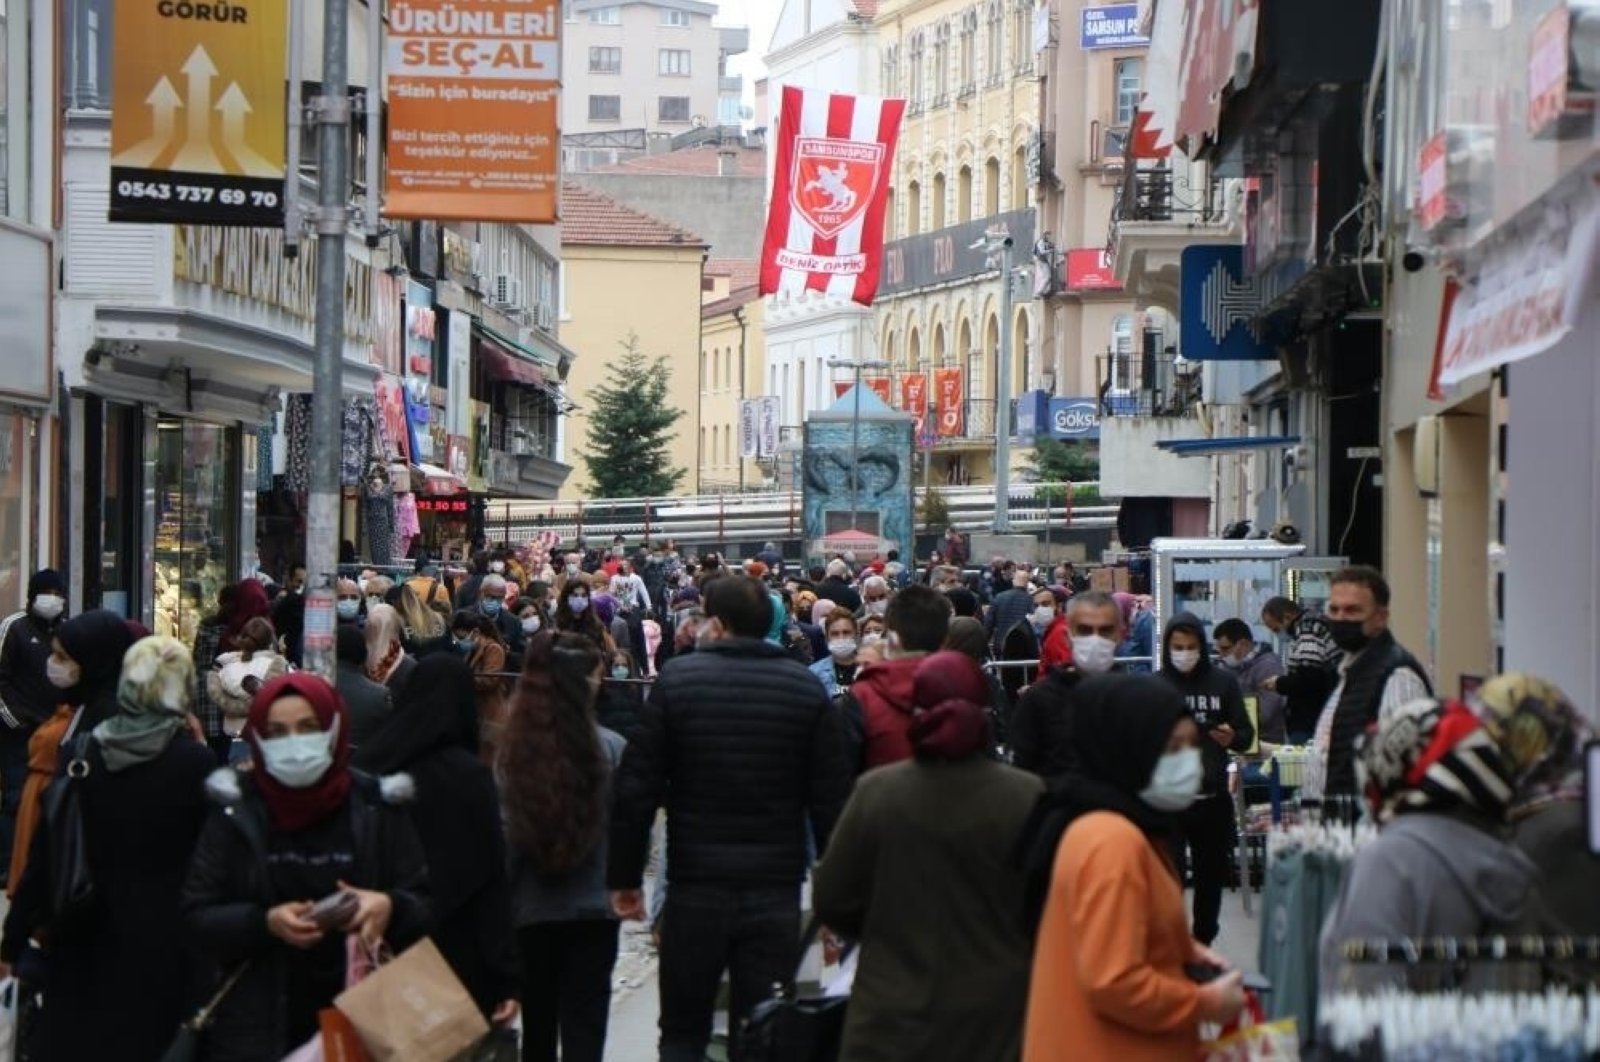 Health literacy remains low in Turkey